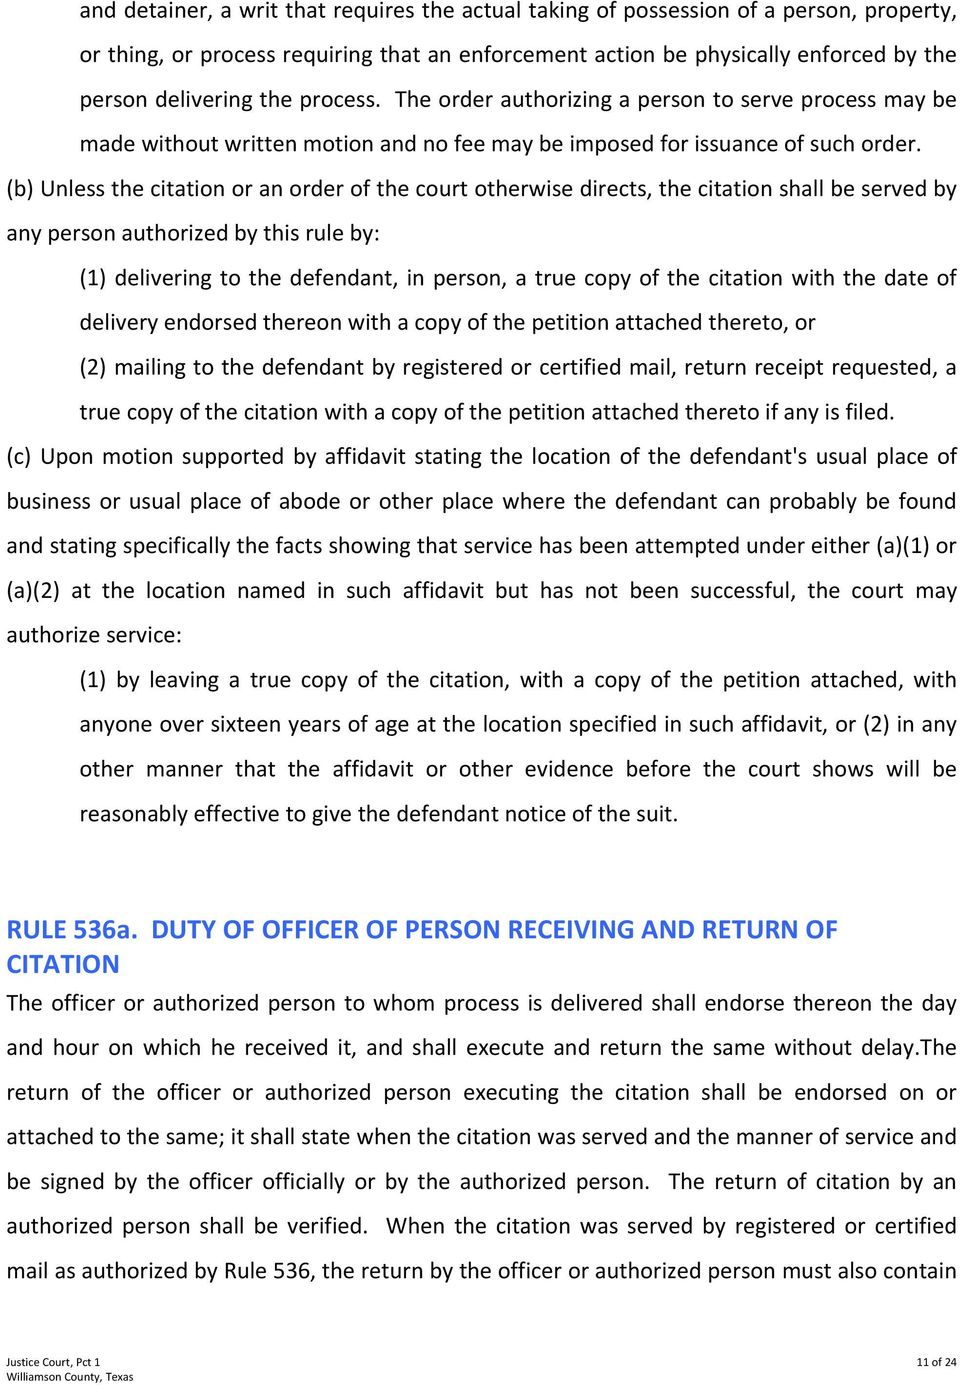 (b) Unless the citation or an order of the court otherwise directs, the citation shall be served by any person authorized by this rule by: (1) delivering to the defendant, in person, a true copy of